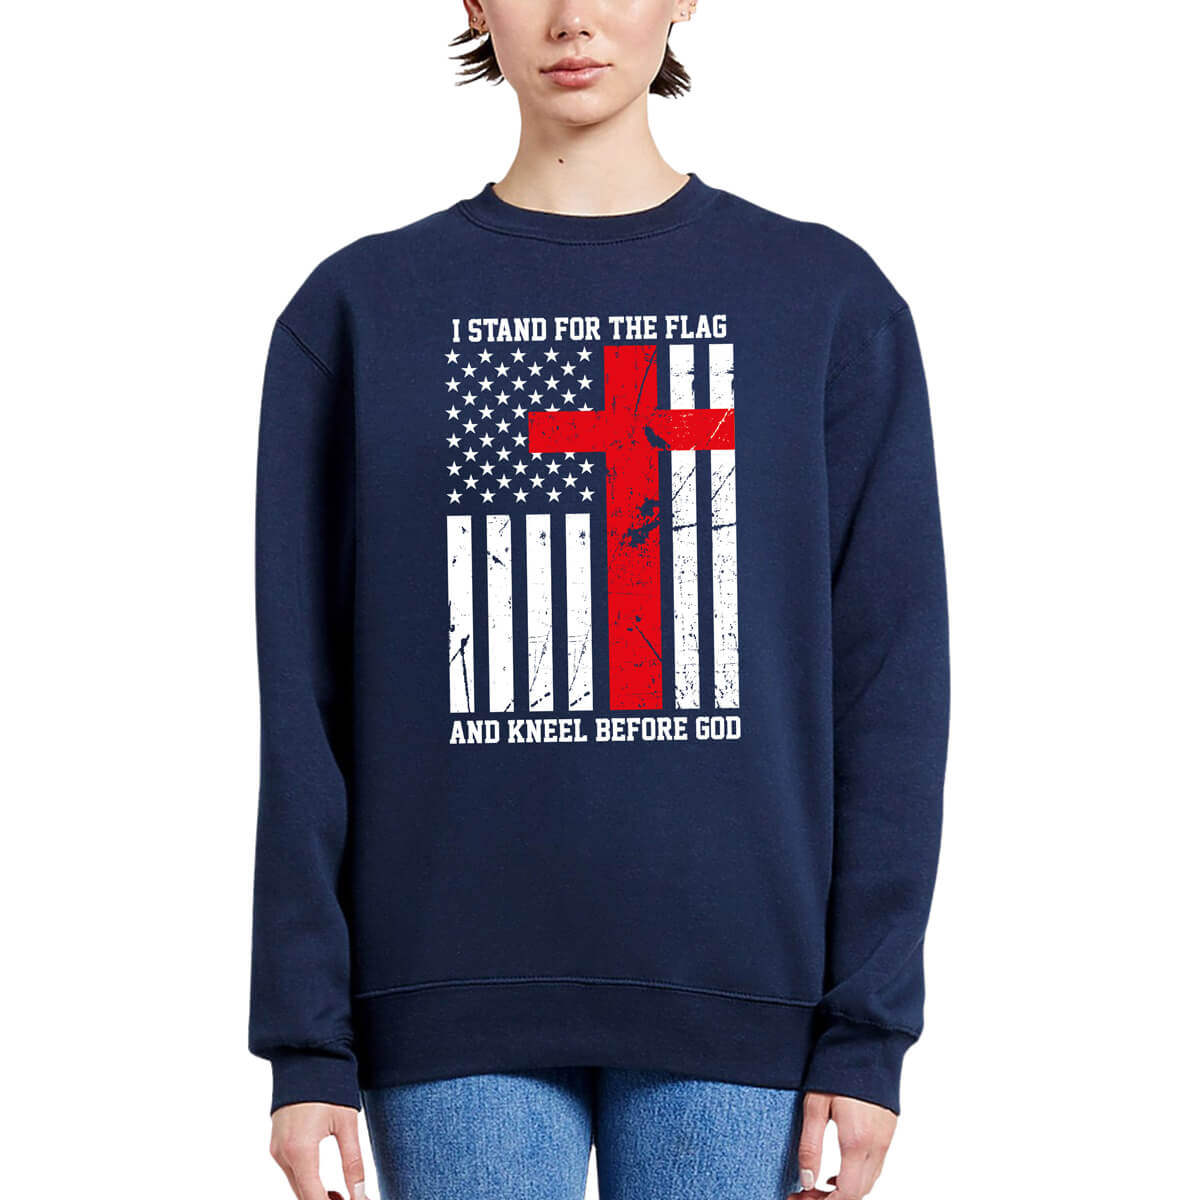 I Stand For The Flag And Kneel Before God Crewneck Sweatshirt